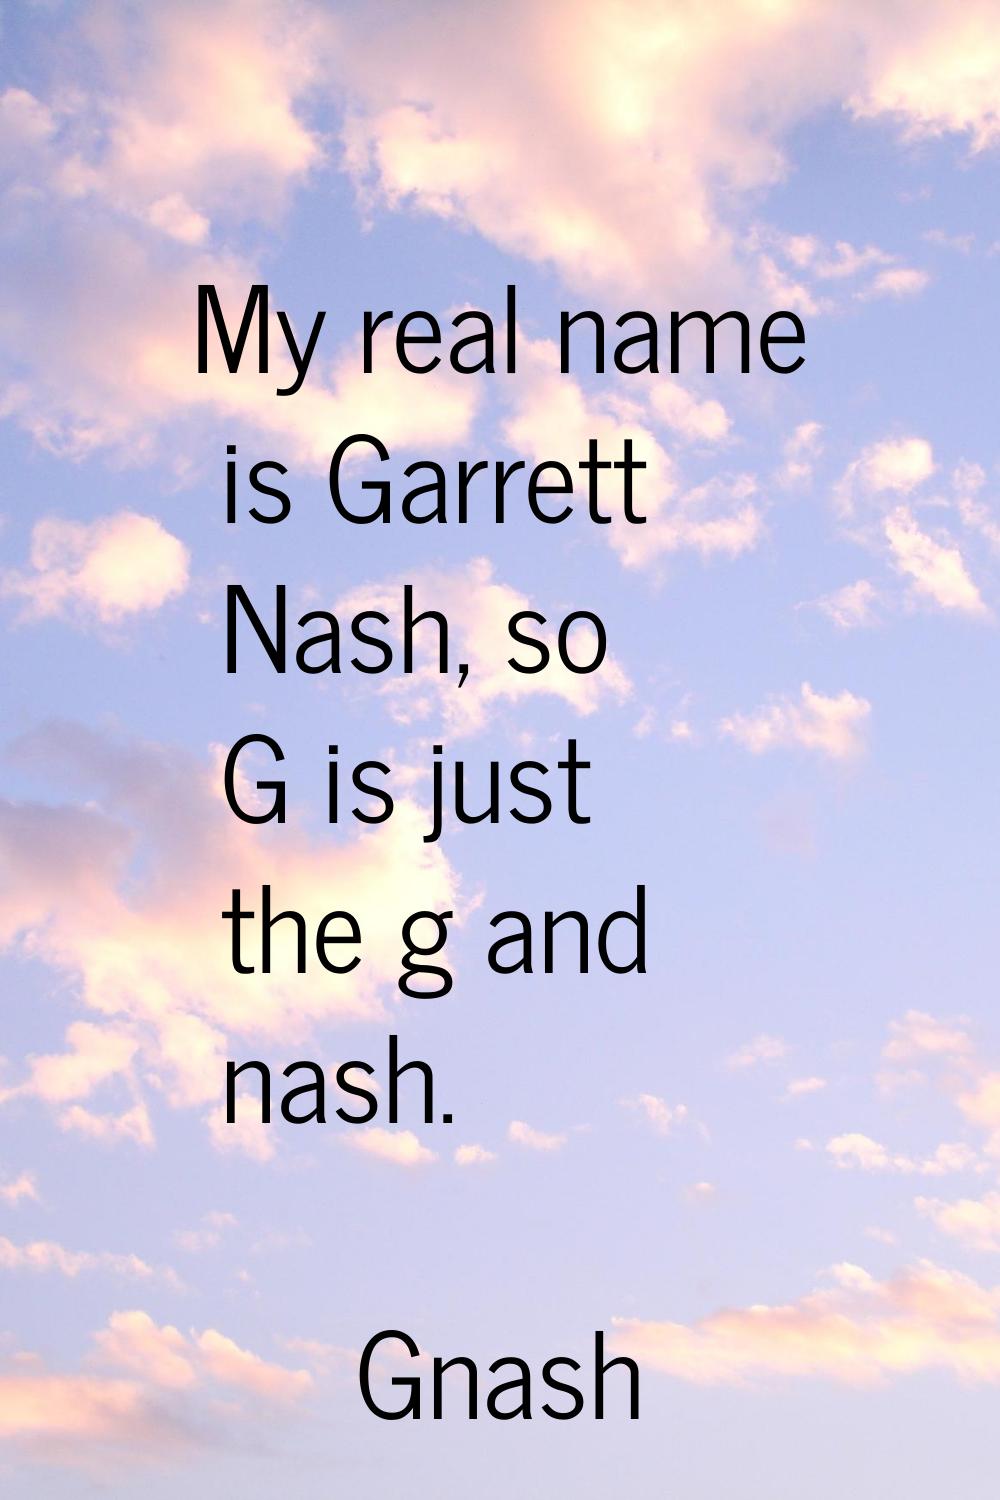 My real name is Garrett Nash, so G is just the g and nash.